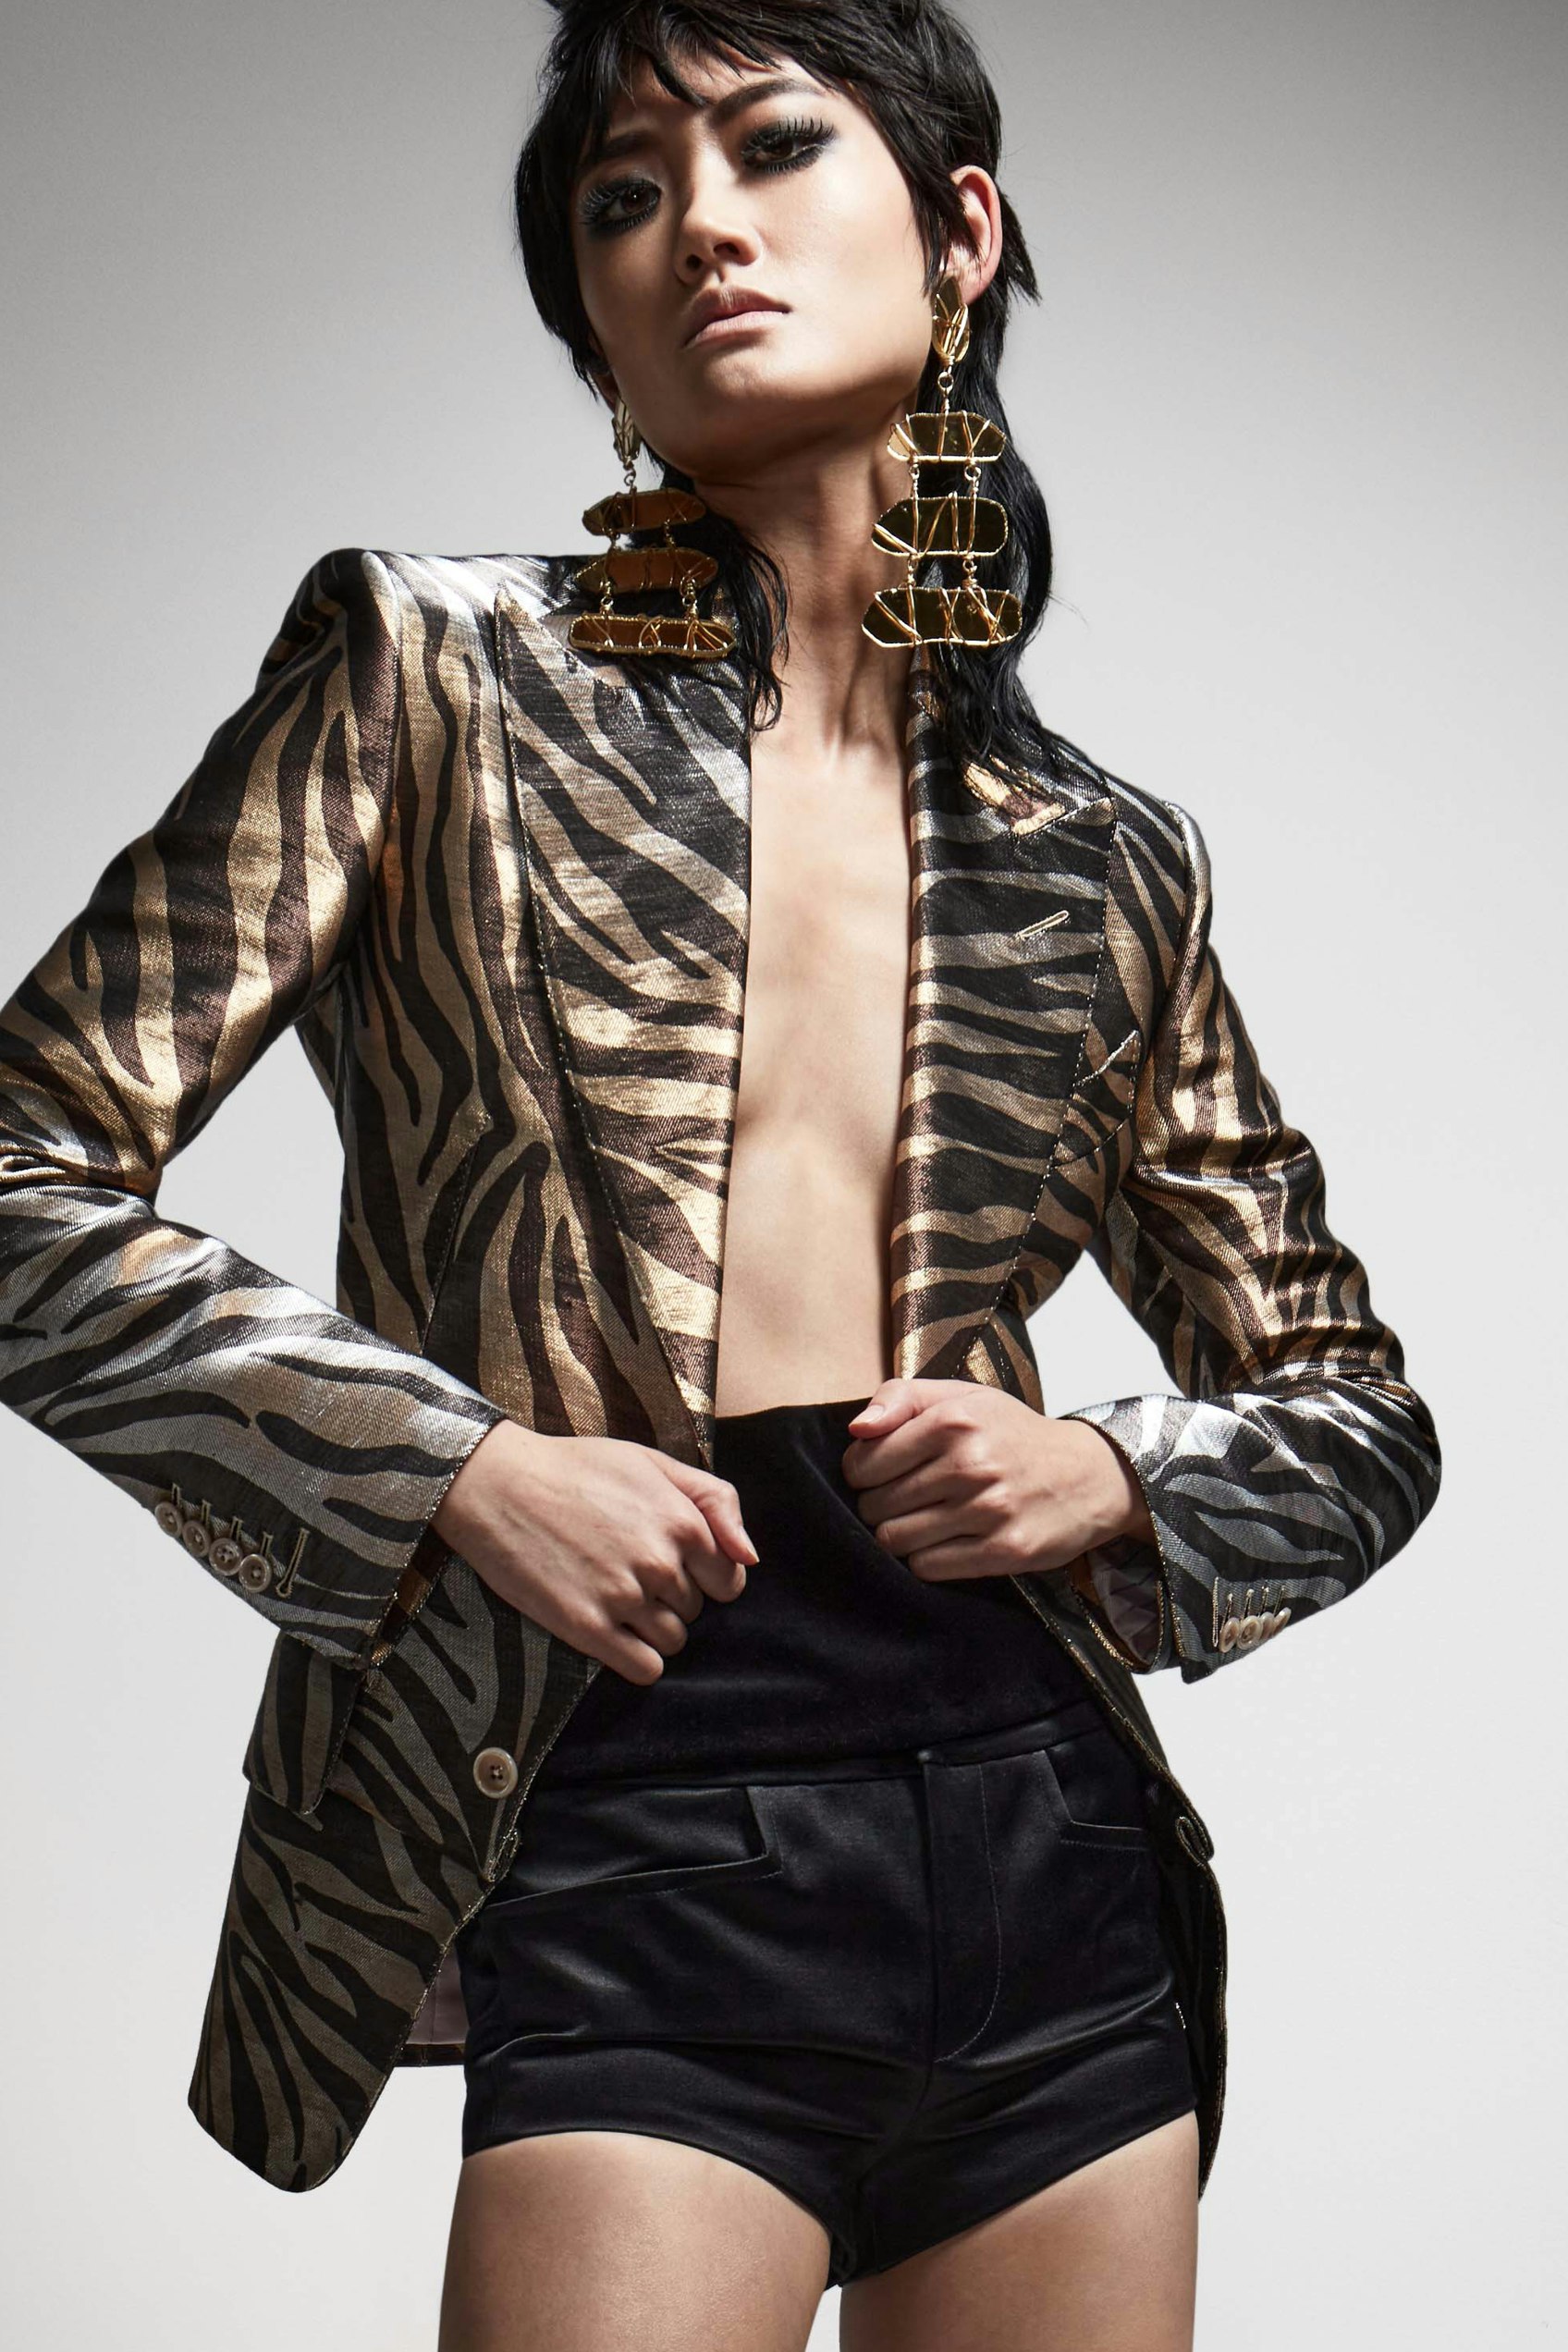 TOM FORD - The Women's Autumn/Winter 2021 Collection features bold colors  yet delicately crafted ready to wear. #TOMFORD #TOMFORDAW21